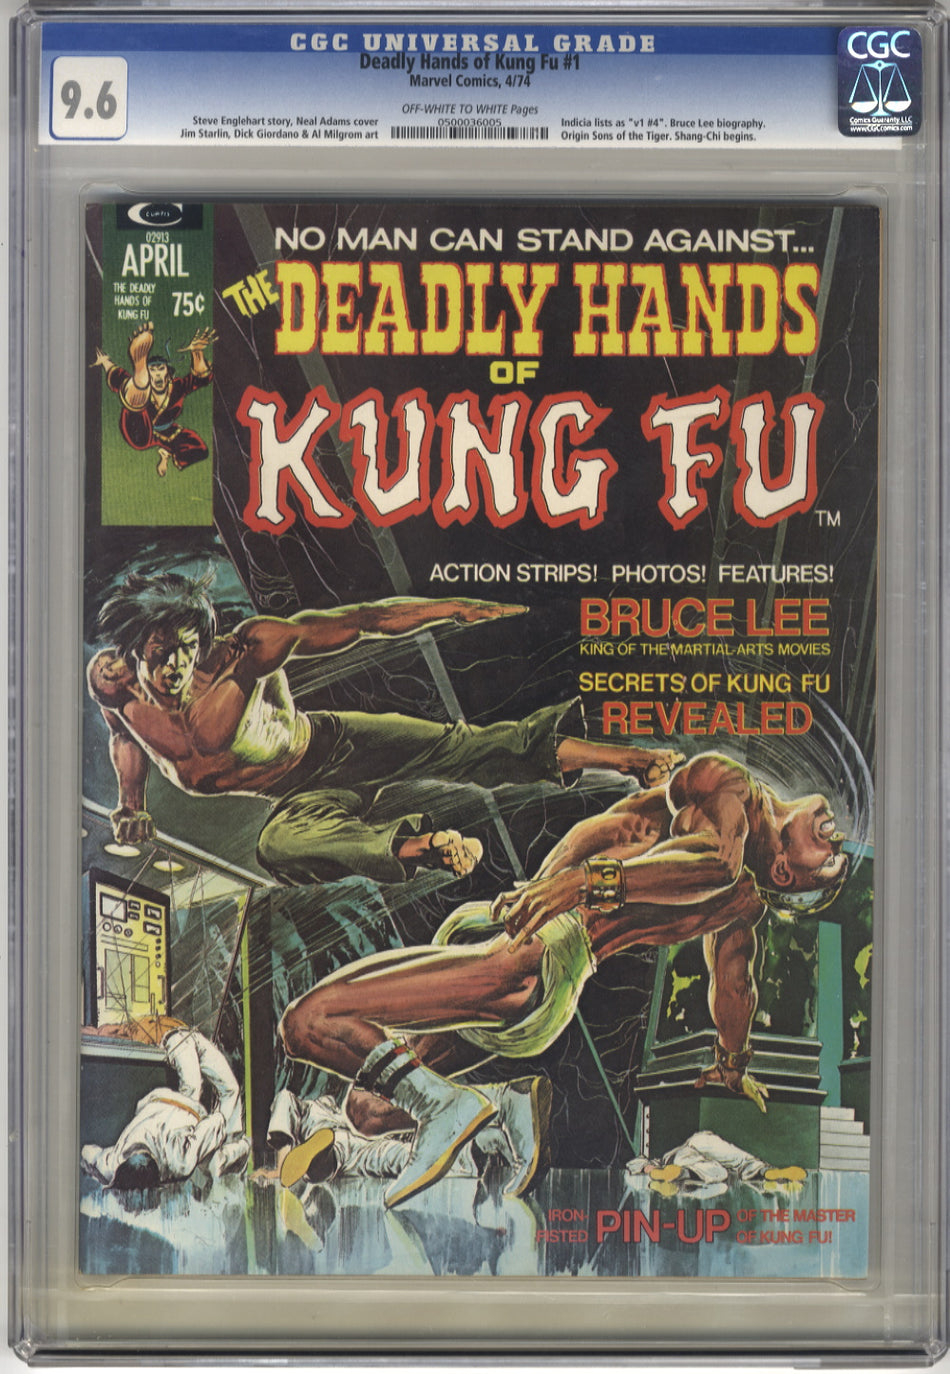 DEADLY HANDS OF KUNG-FU 1 - CGC 9.6